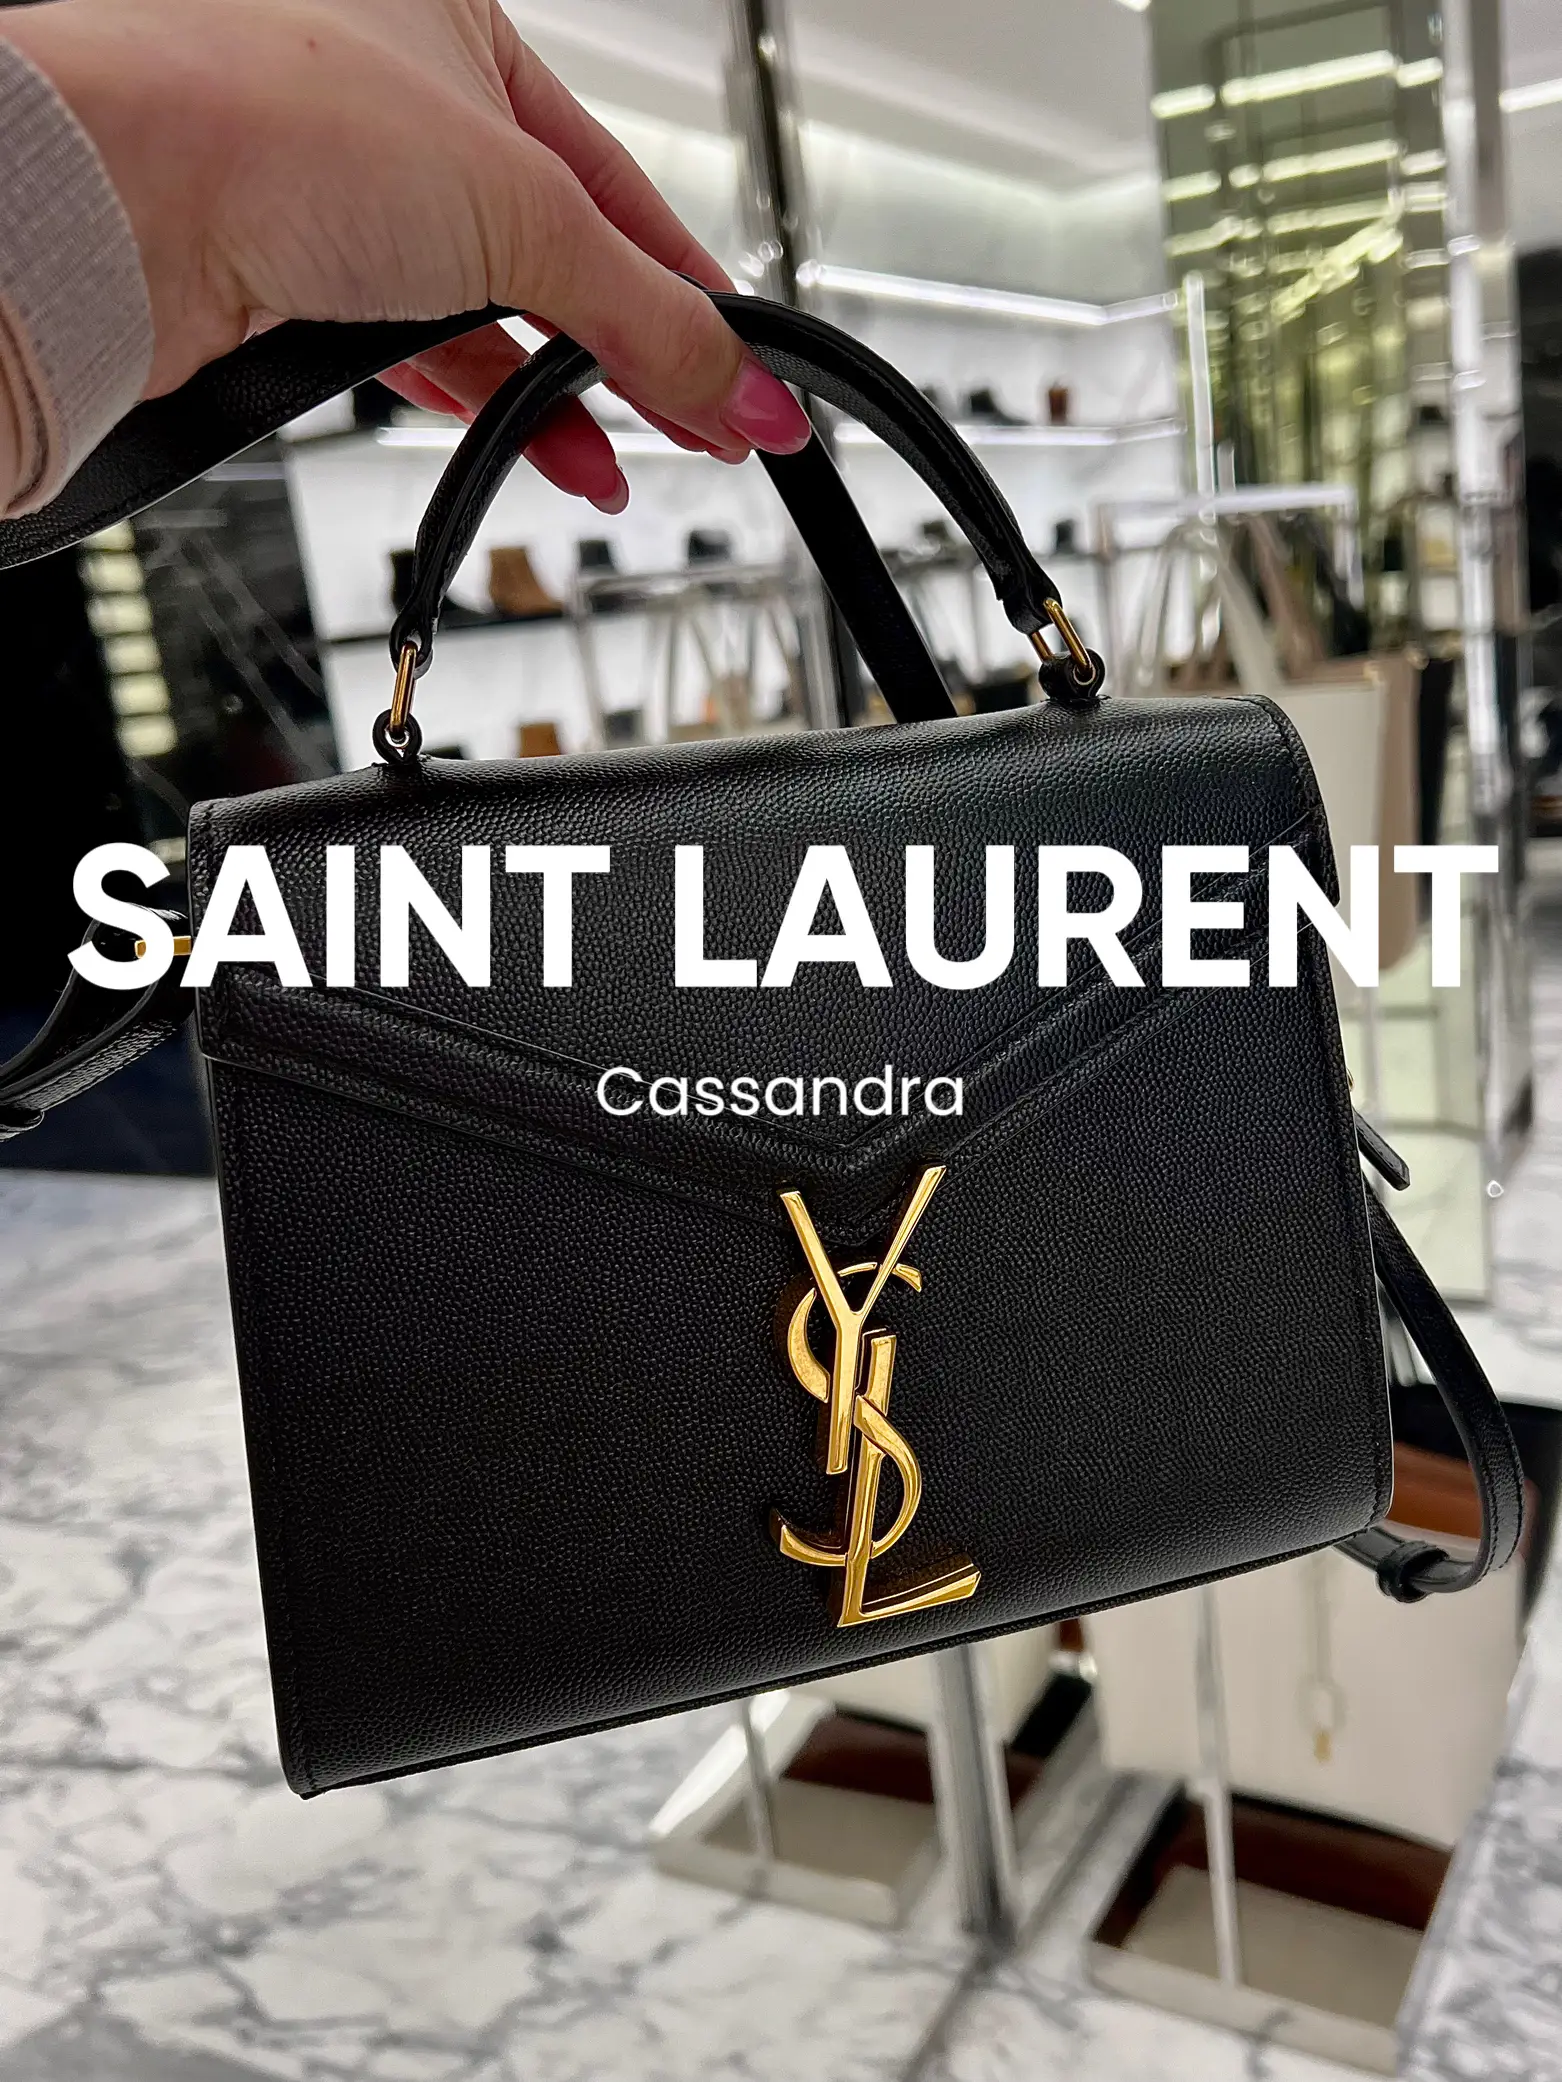 YSL Lou Camera Bag unboxing and try on / Gucci VS YSL #ysl